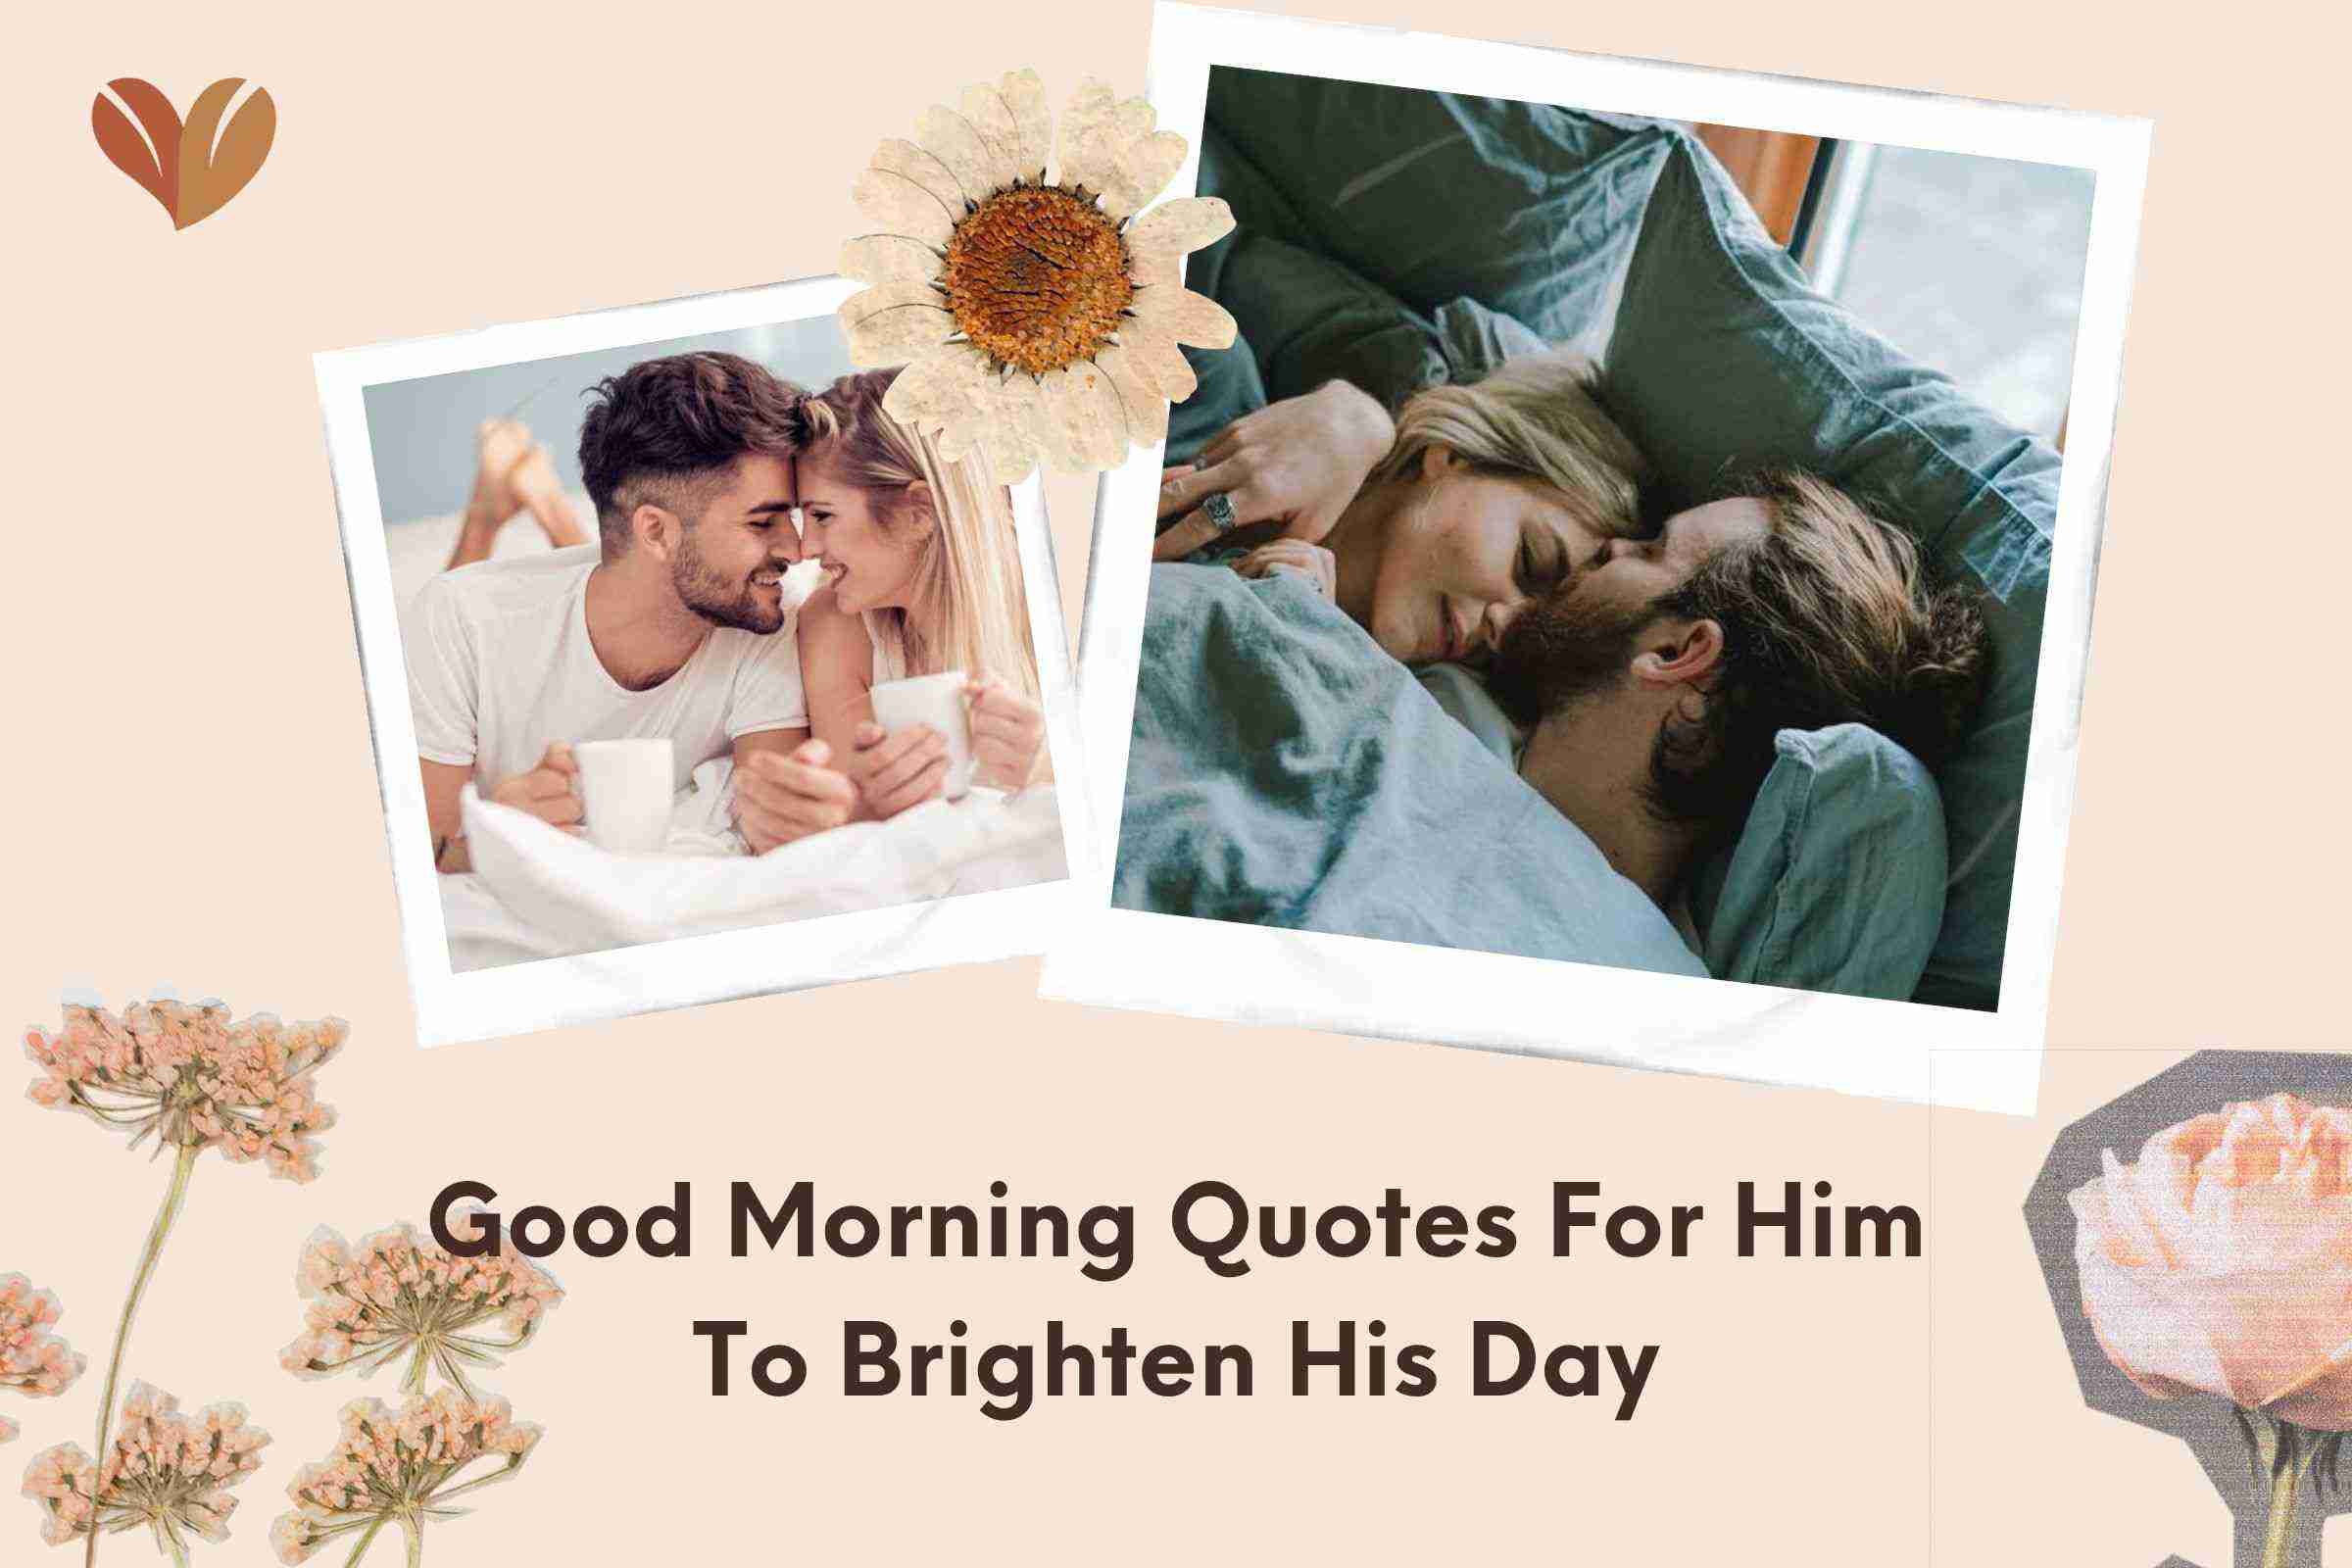 Good Morning Quotes For Him To Brighten His Day